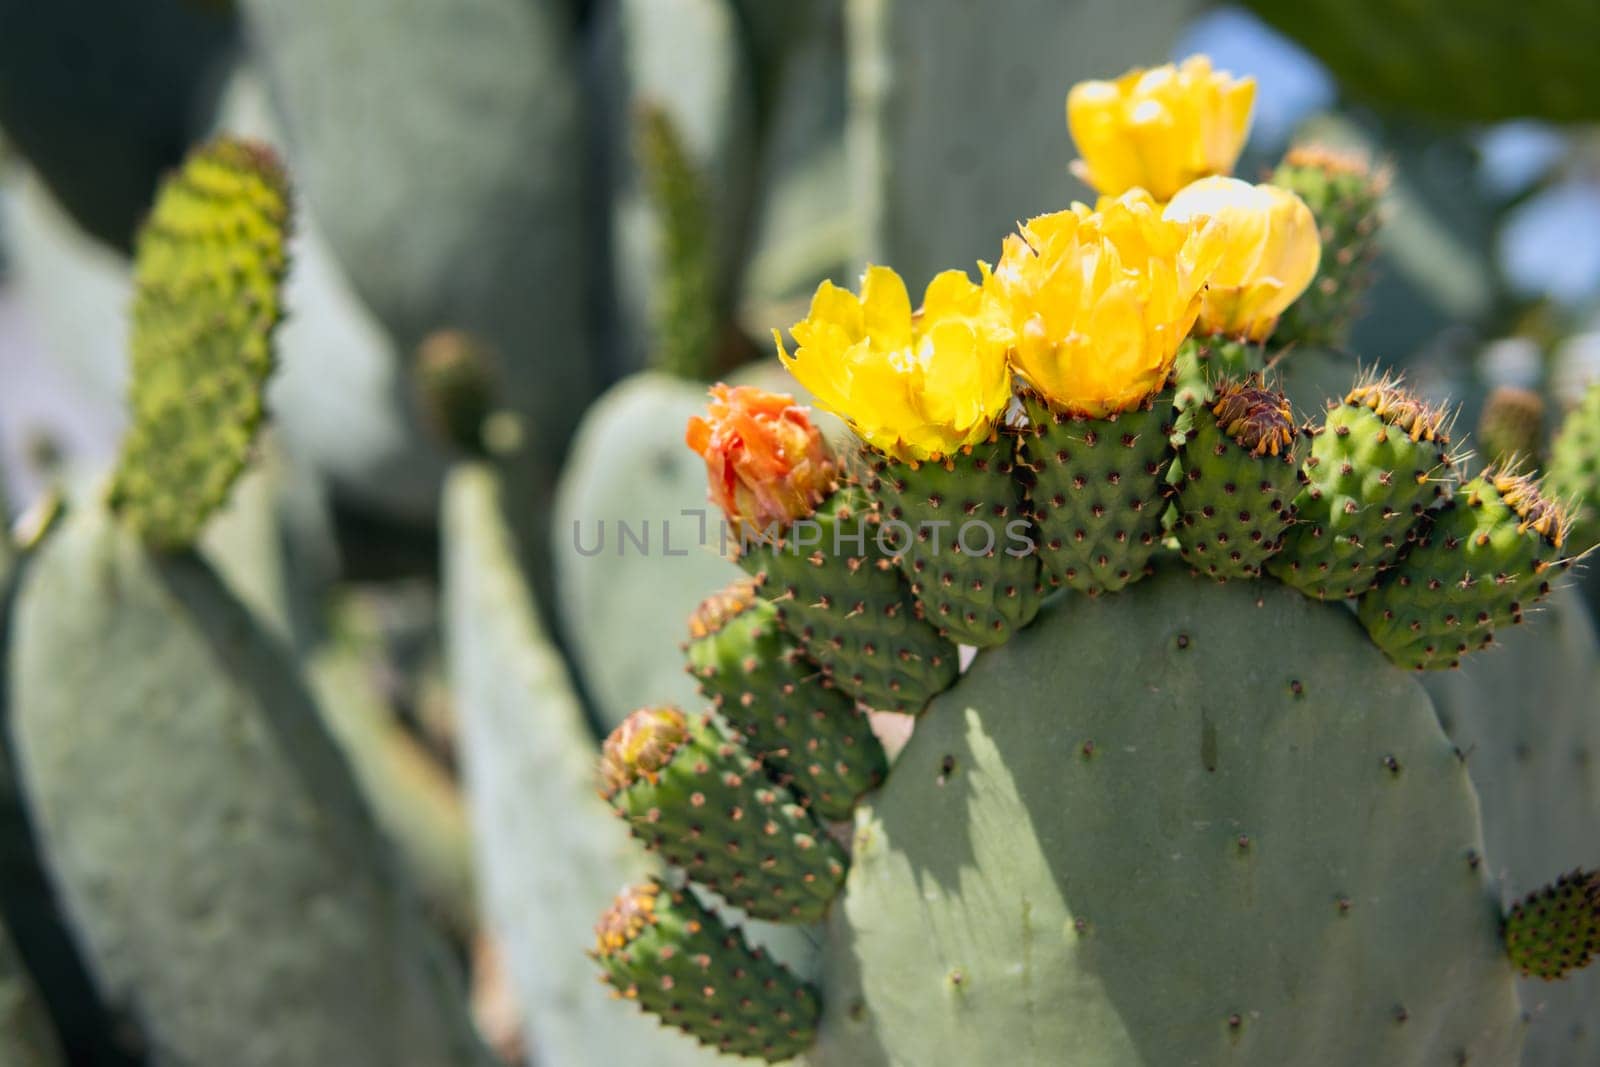 The cactus blooms with beautiful bright yellow flowers that look like a crown. by PopOff